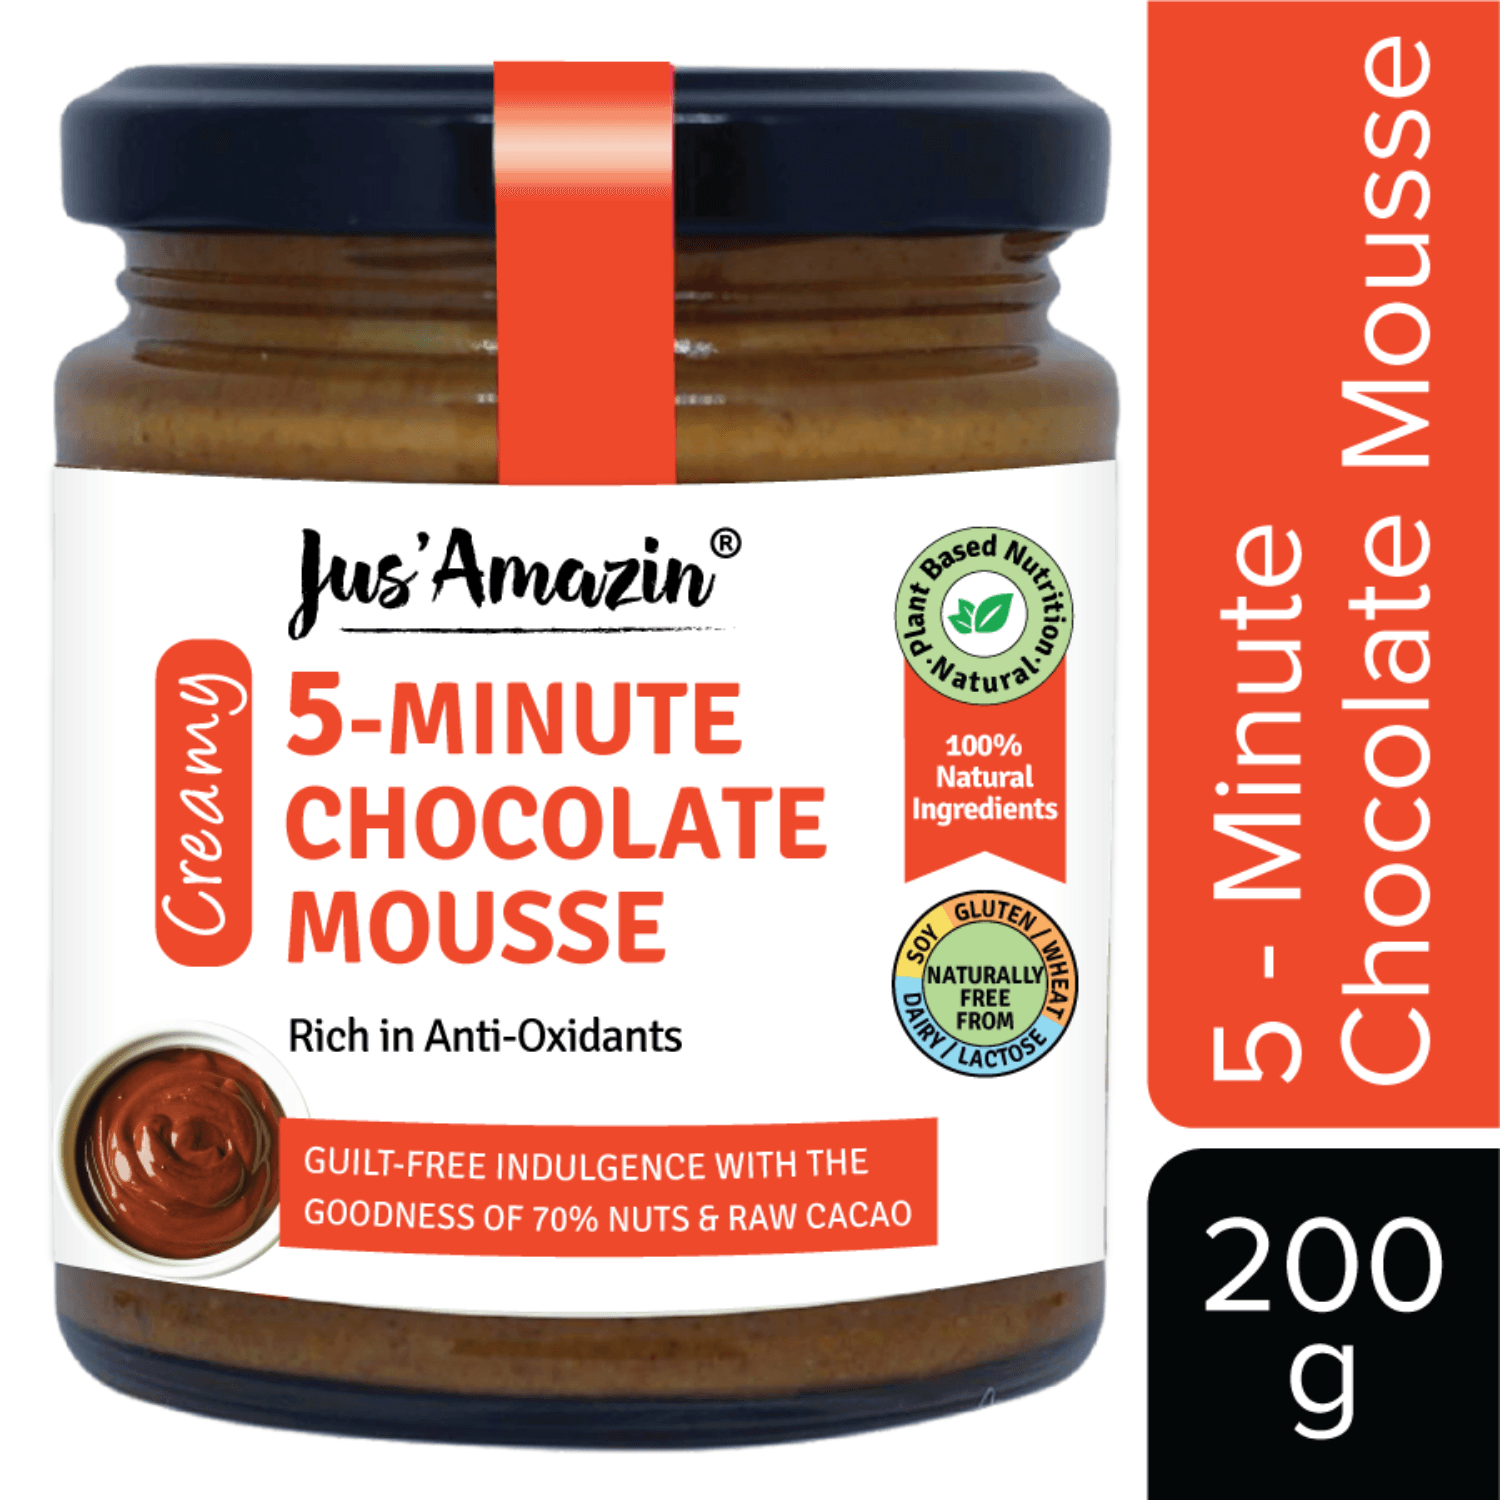 Jus Amazin 5-Minute Chocolate Mousse (200g) - plant based Dukan